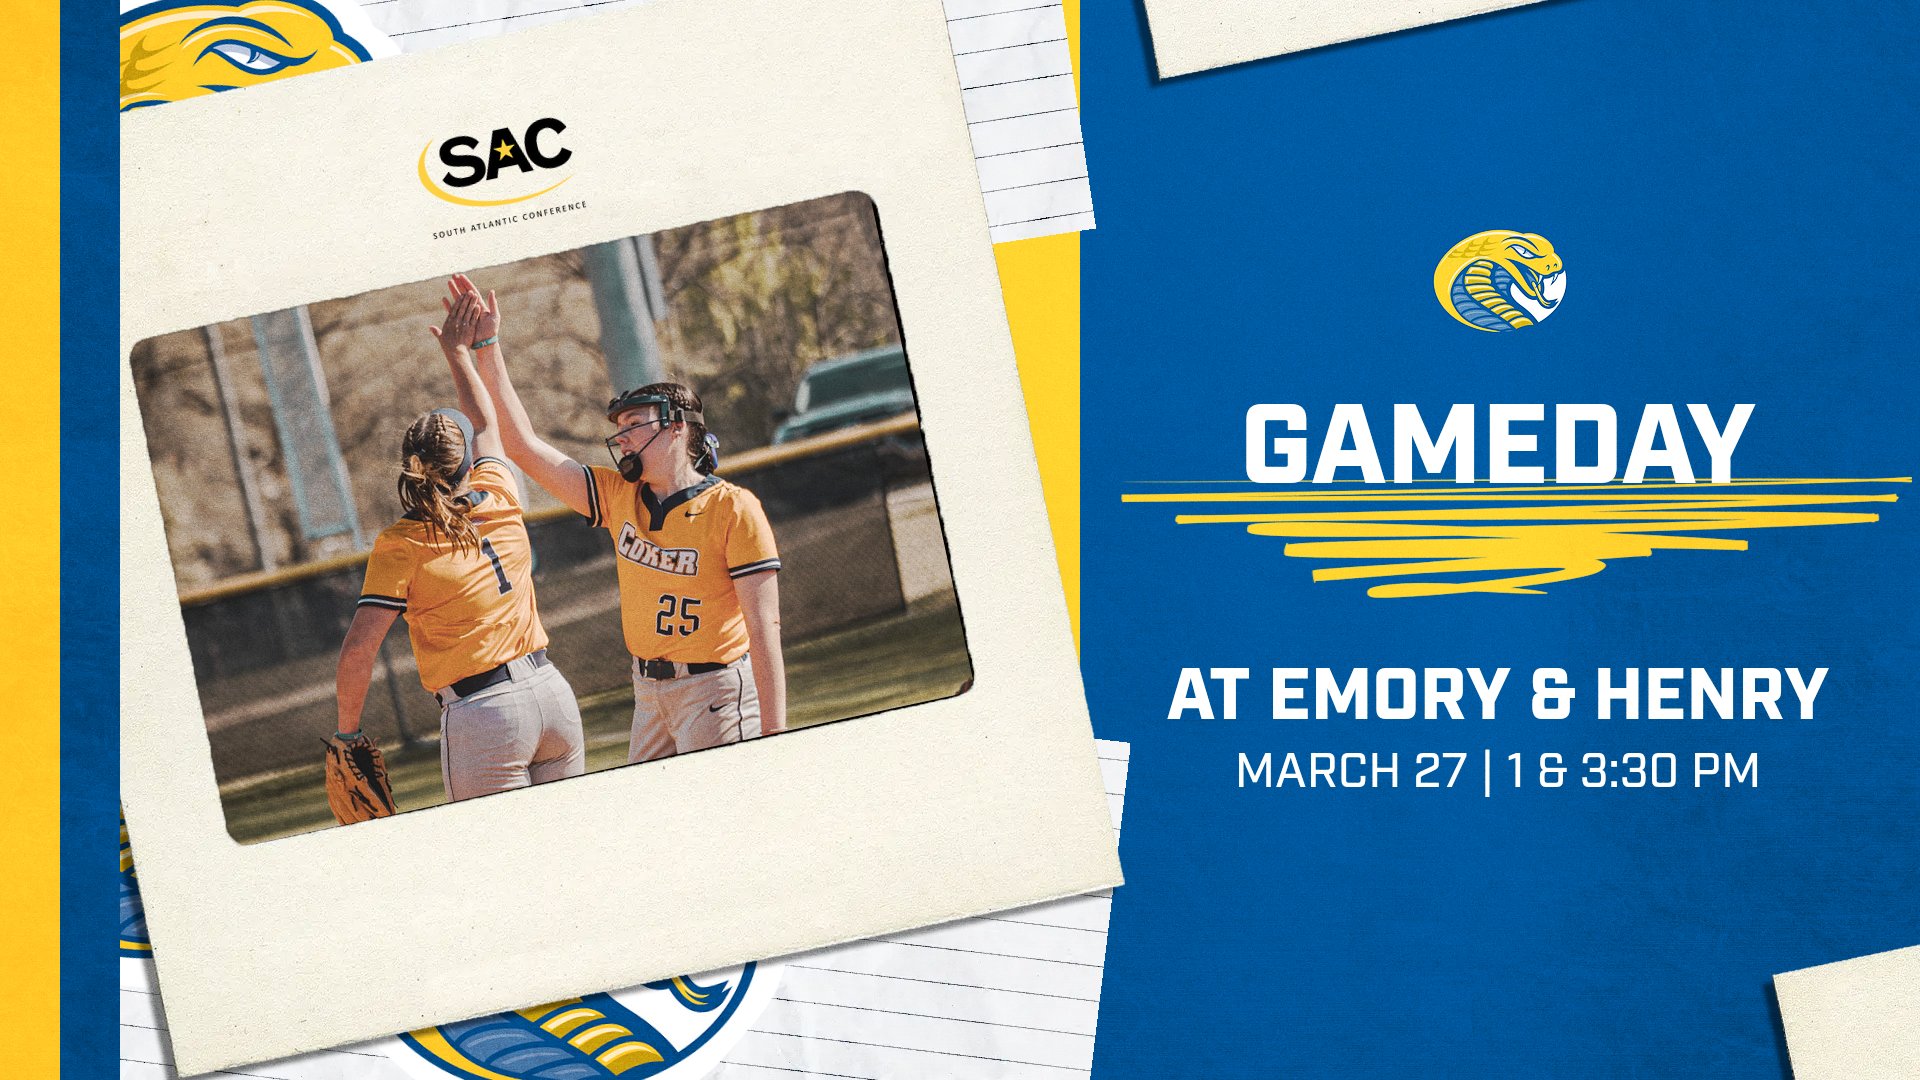 Cobras Drop the SAC Doubleheader Against Emory & Henry